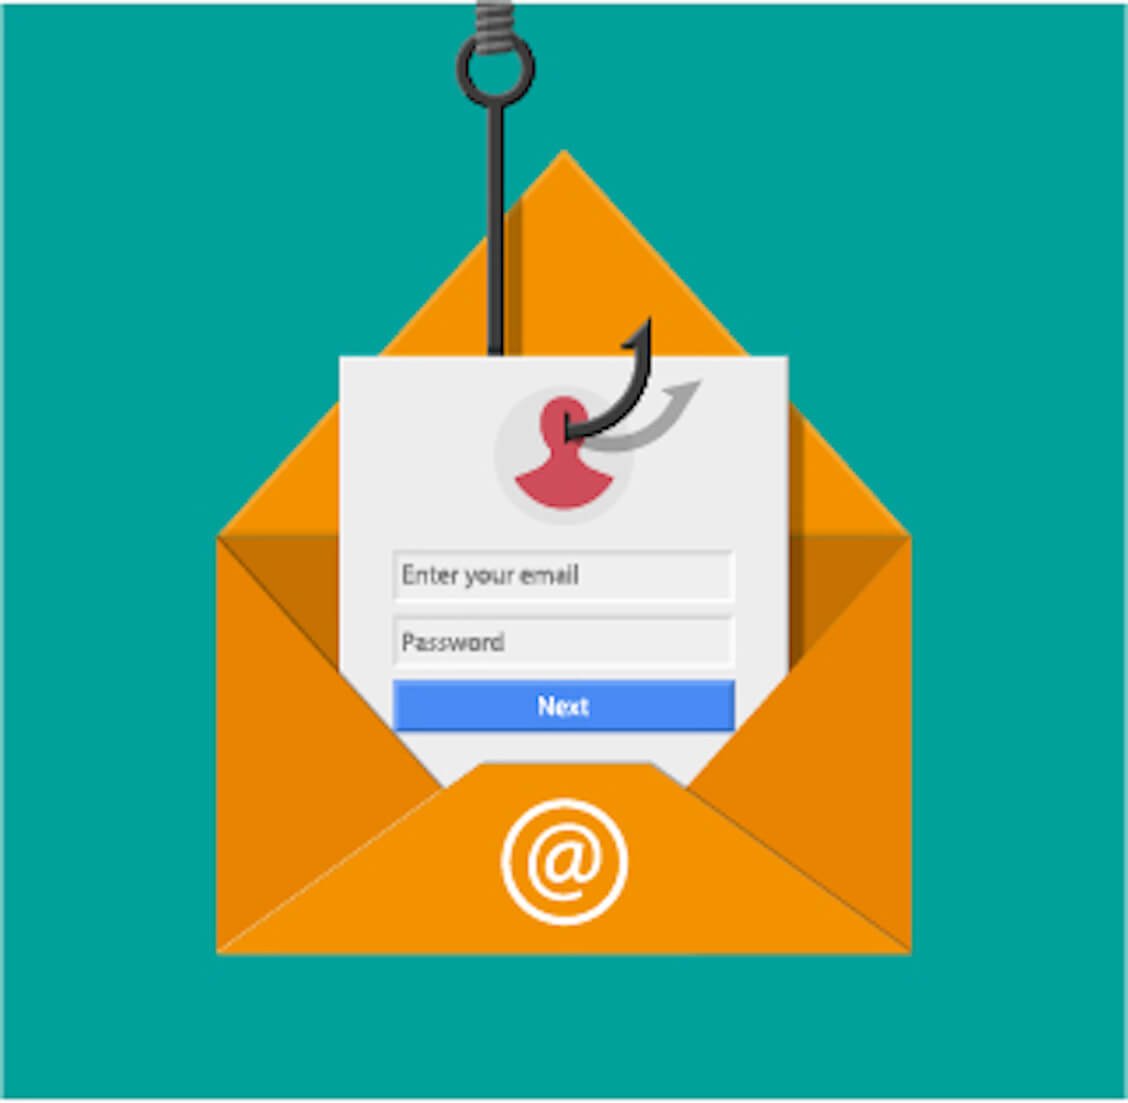 Ultimate Guide to Online Safety: How to Prevent Phishing Attacks